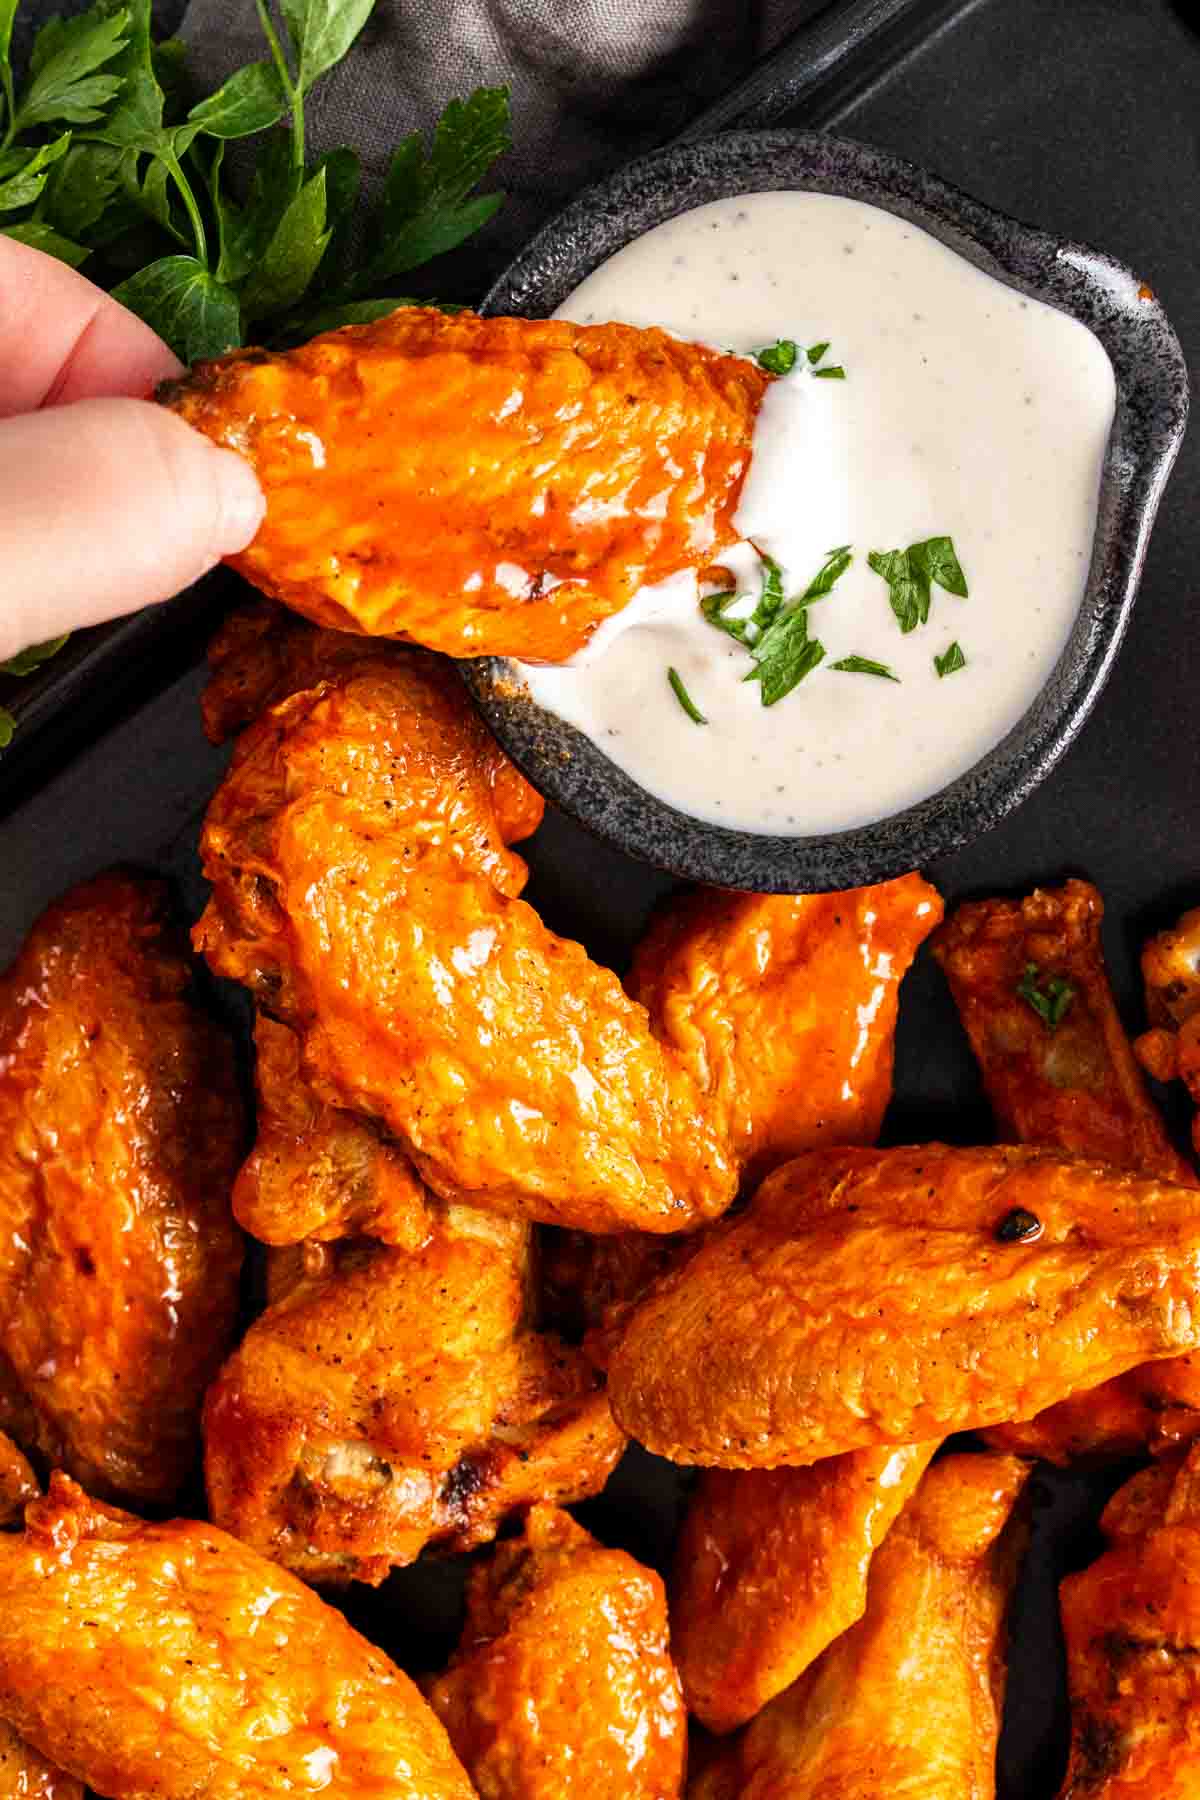 A person dipping Air Fryer Chicken Wings in a creamy sauce.